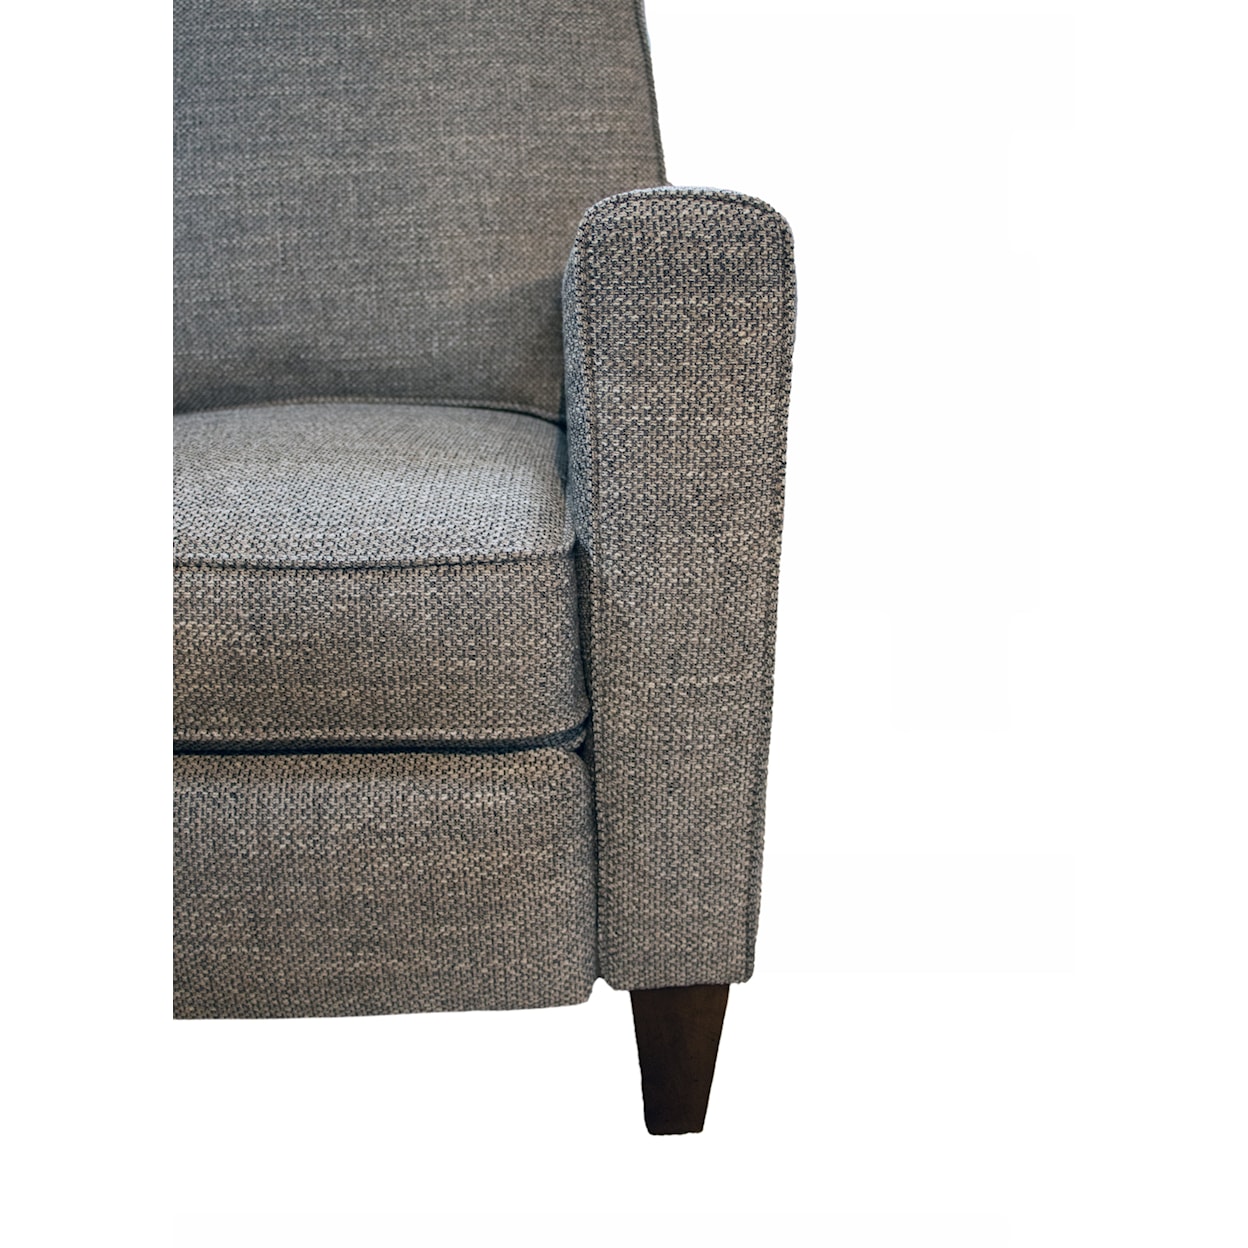 England 6200/LS Series Transitional Recliner with Exposed Wood Legs